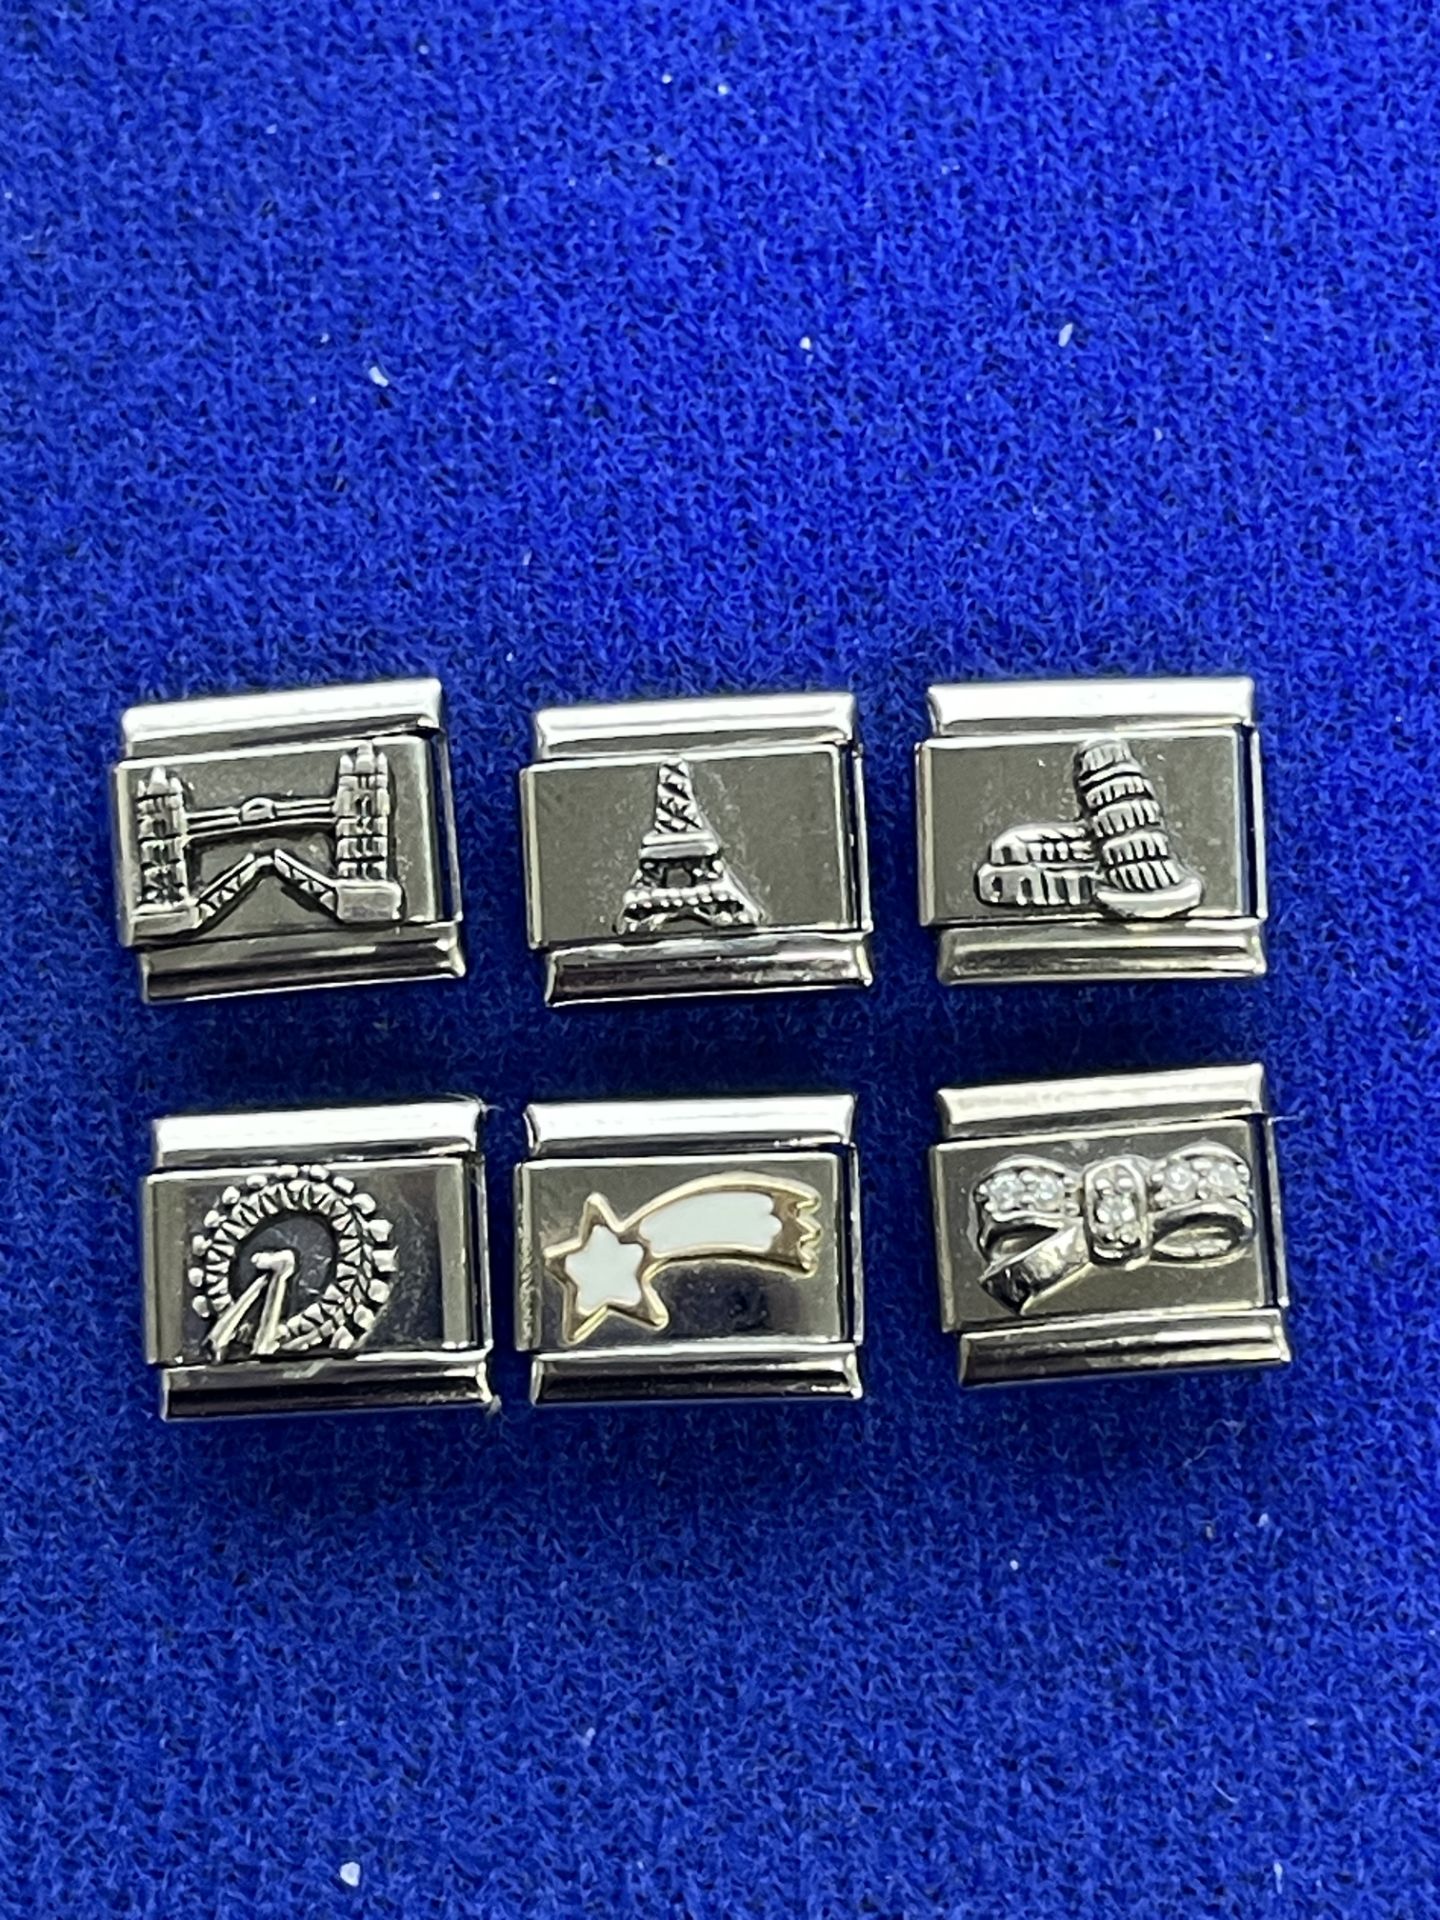 6 x Ex-Display Classic Nomination Charms